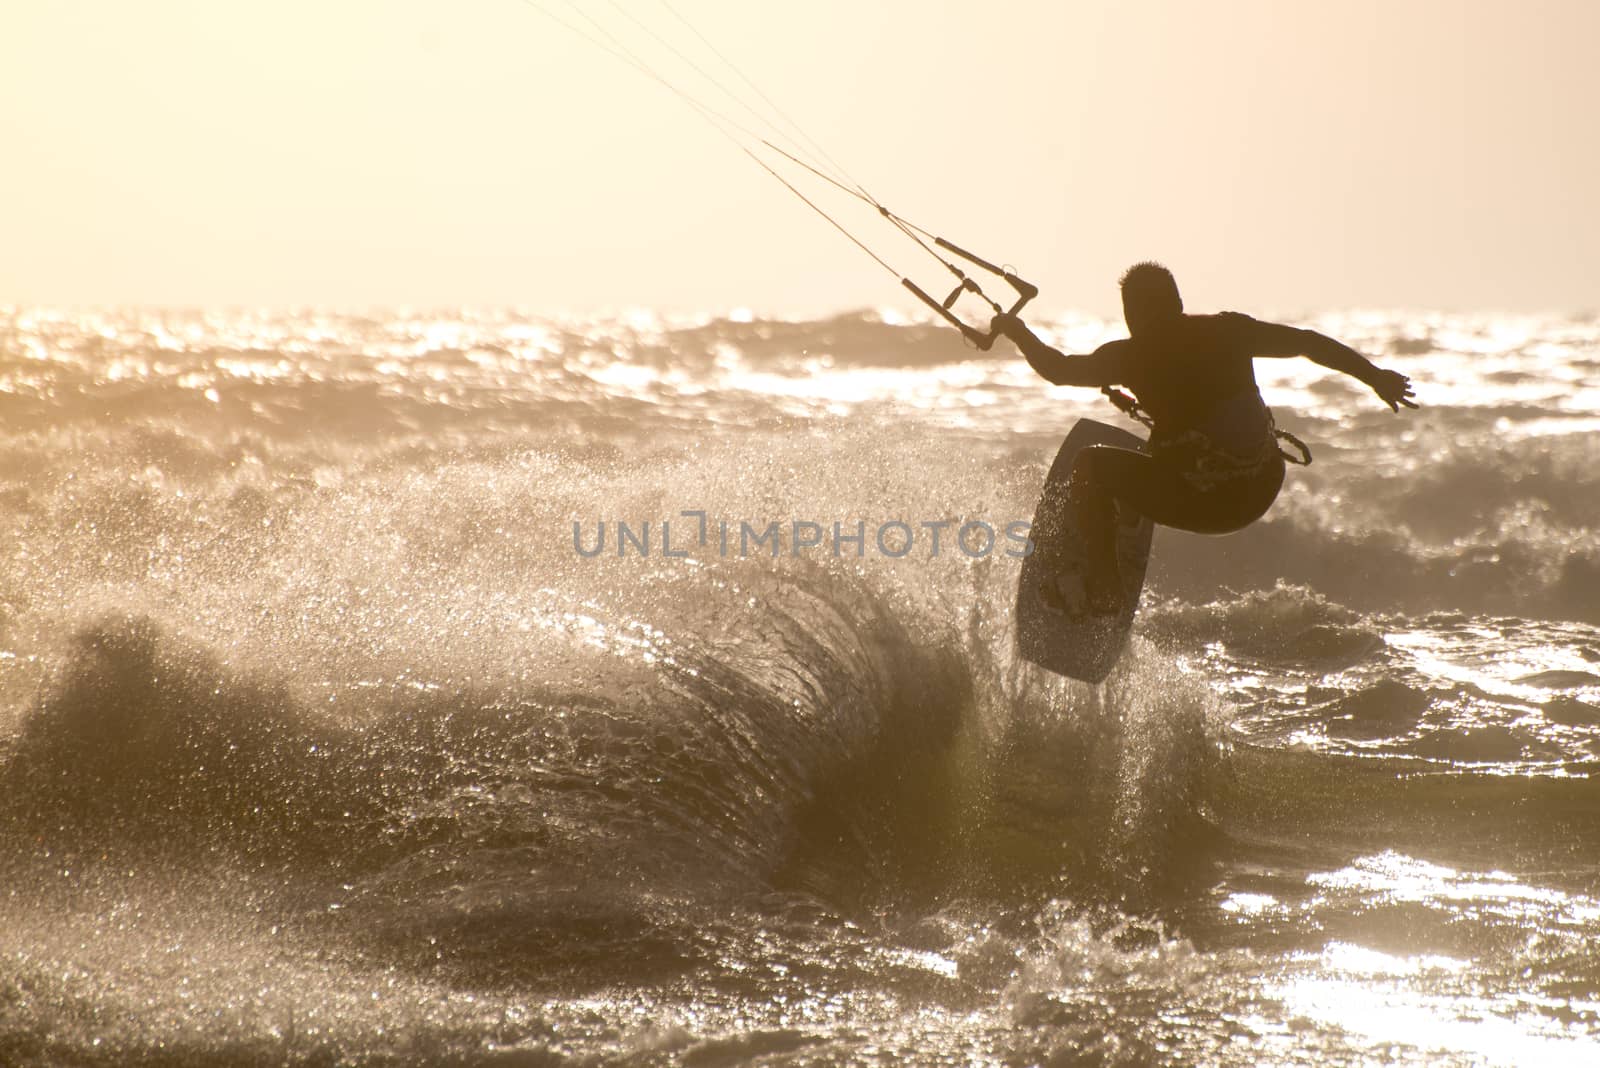 Kitesurfer jumping on a beautiful background of spray during the sunset.